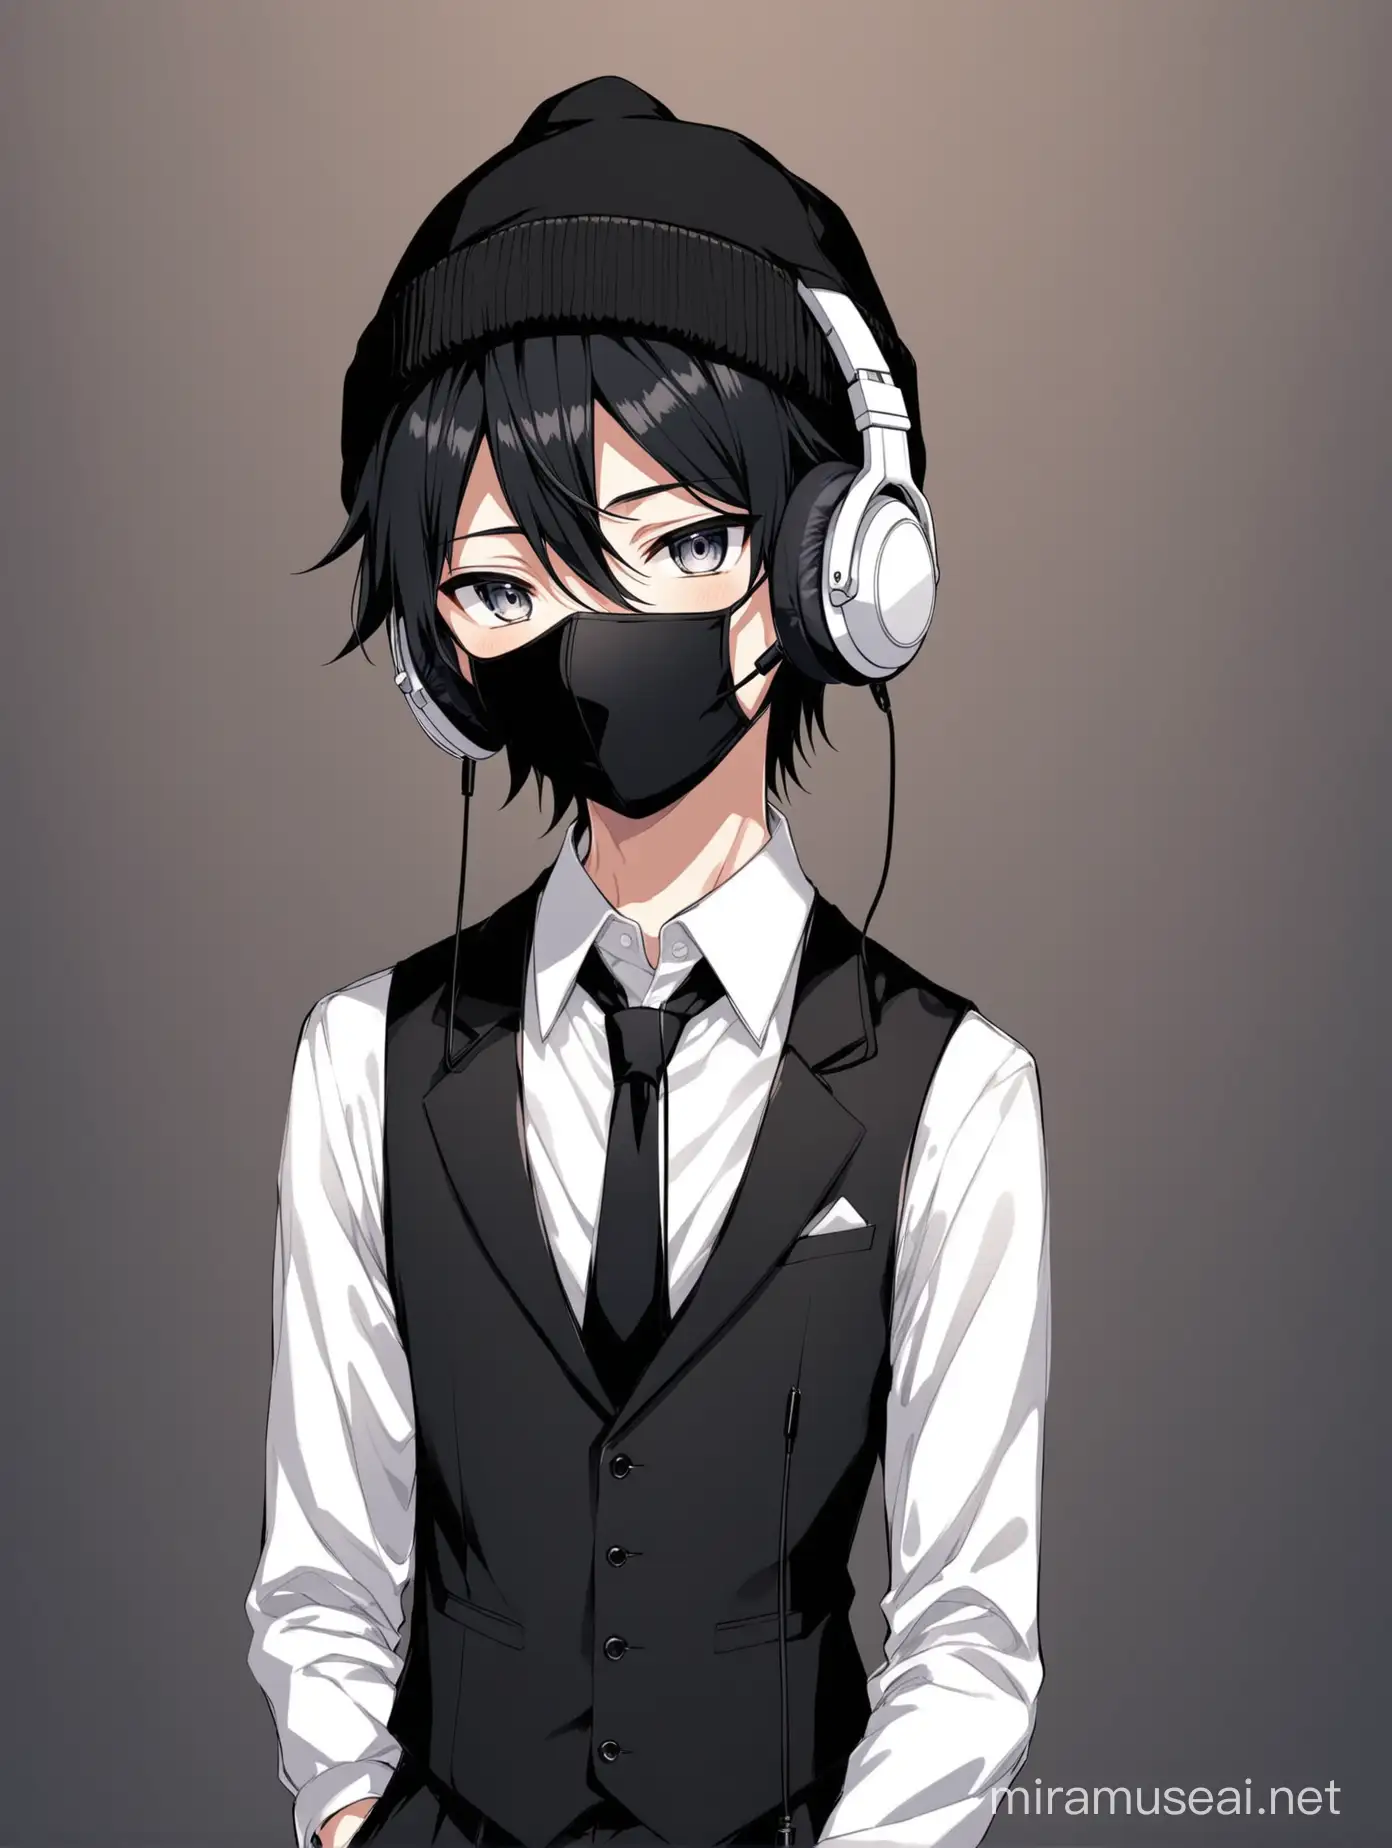 Cute anime boy. He is wearing a suit of sorts. Black vest, black tie, white collared shirt.
He has black hair, a black beanie and a black mask, along with white headphones on his ears